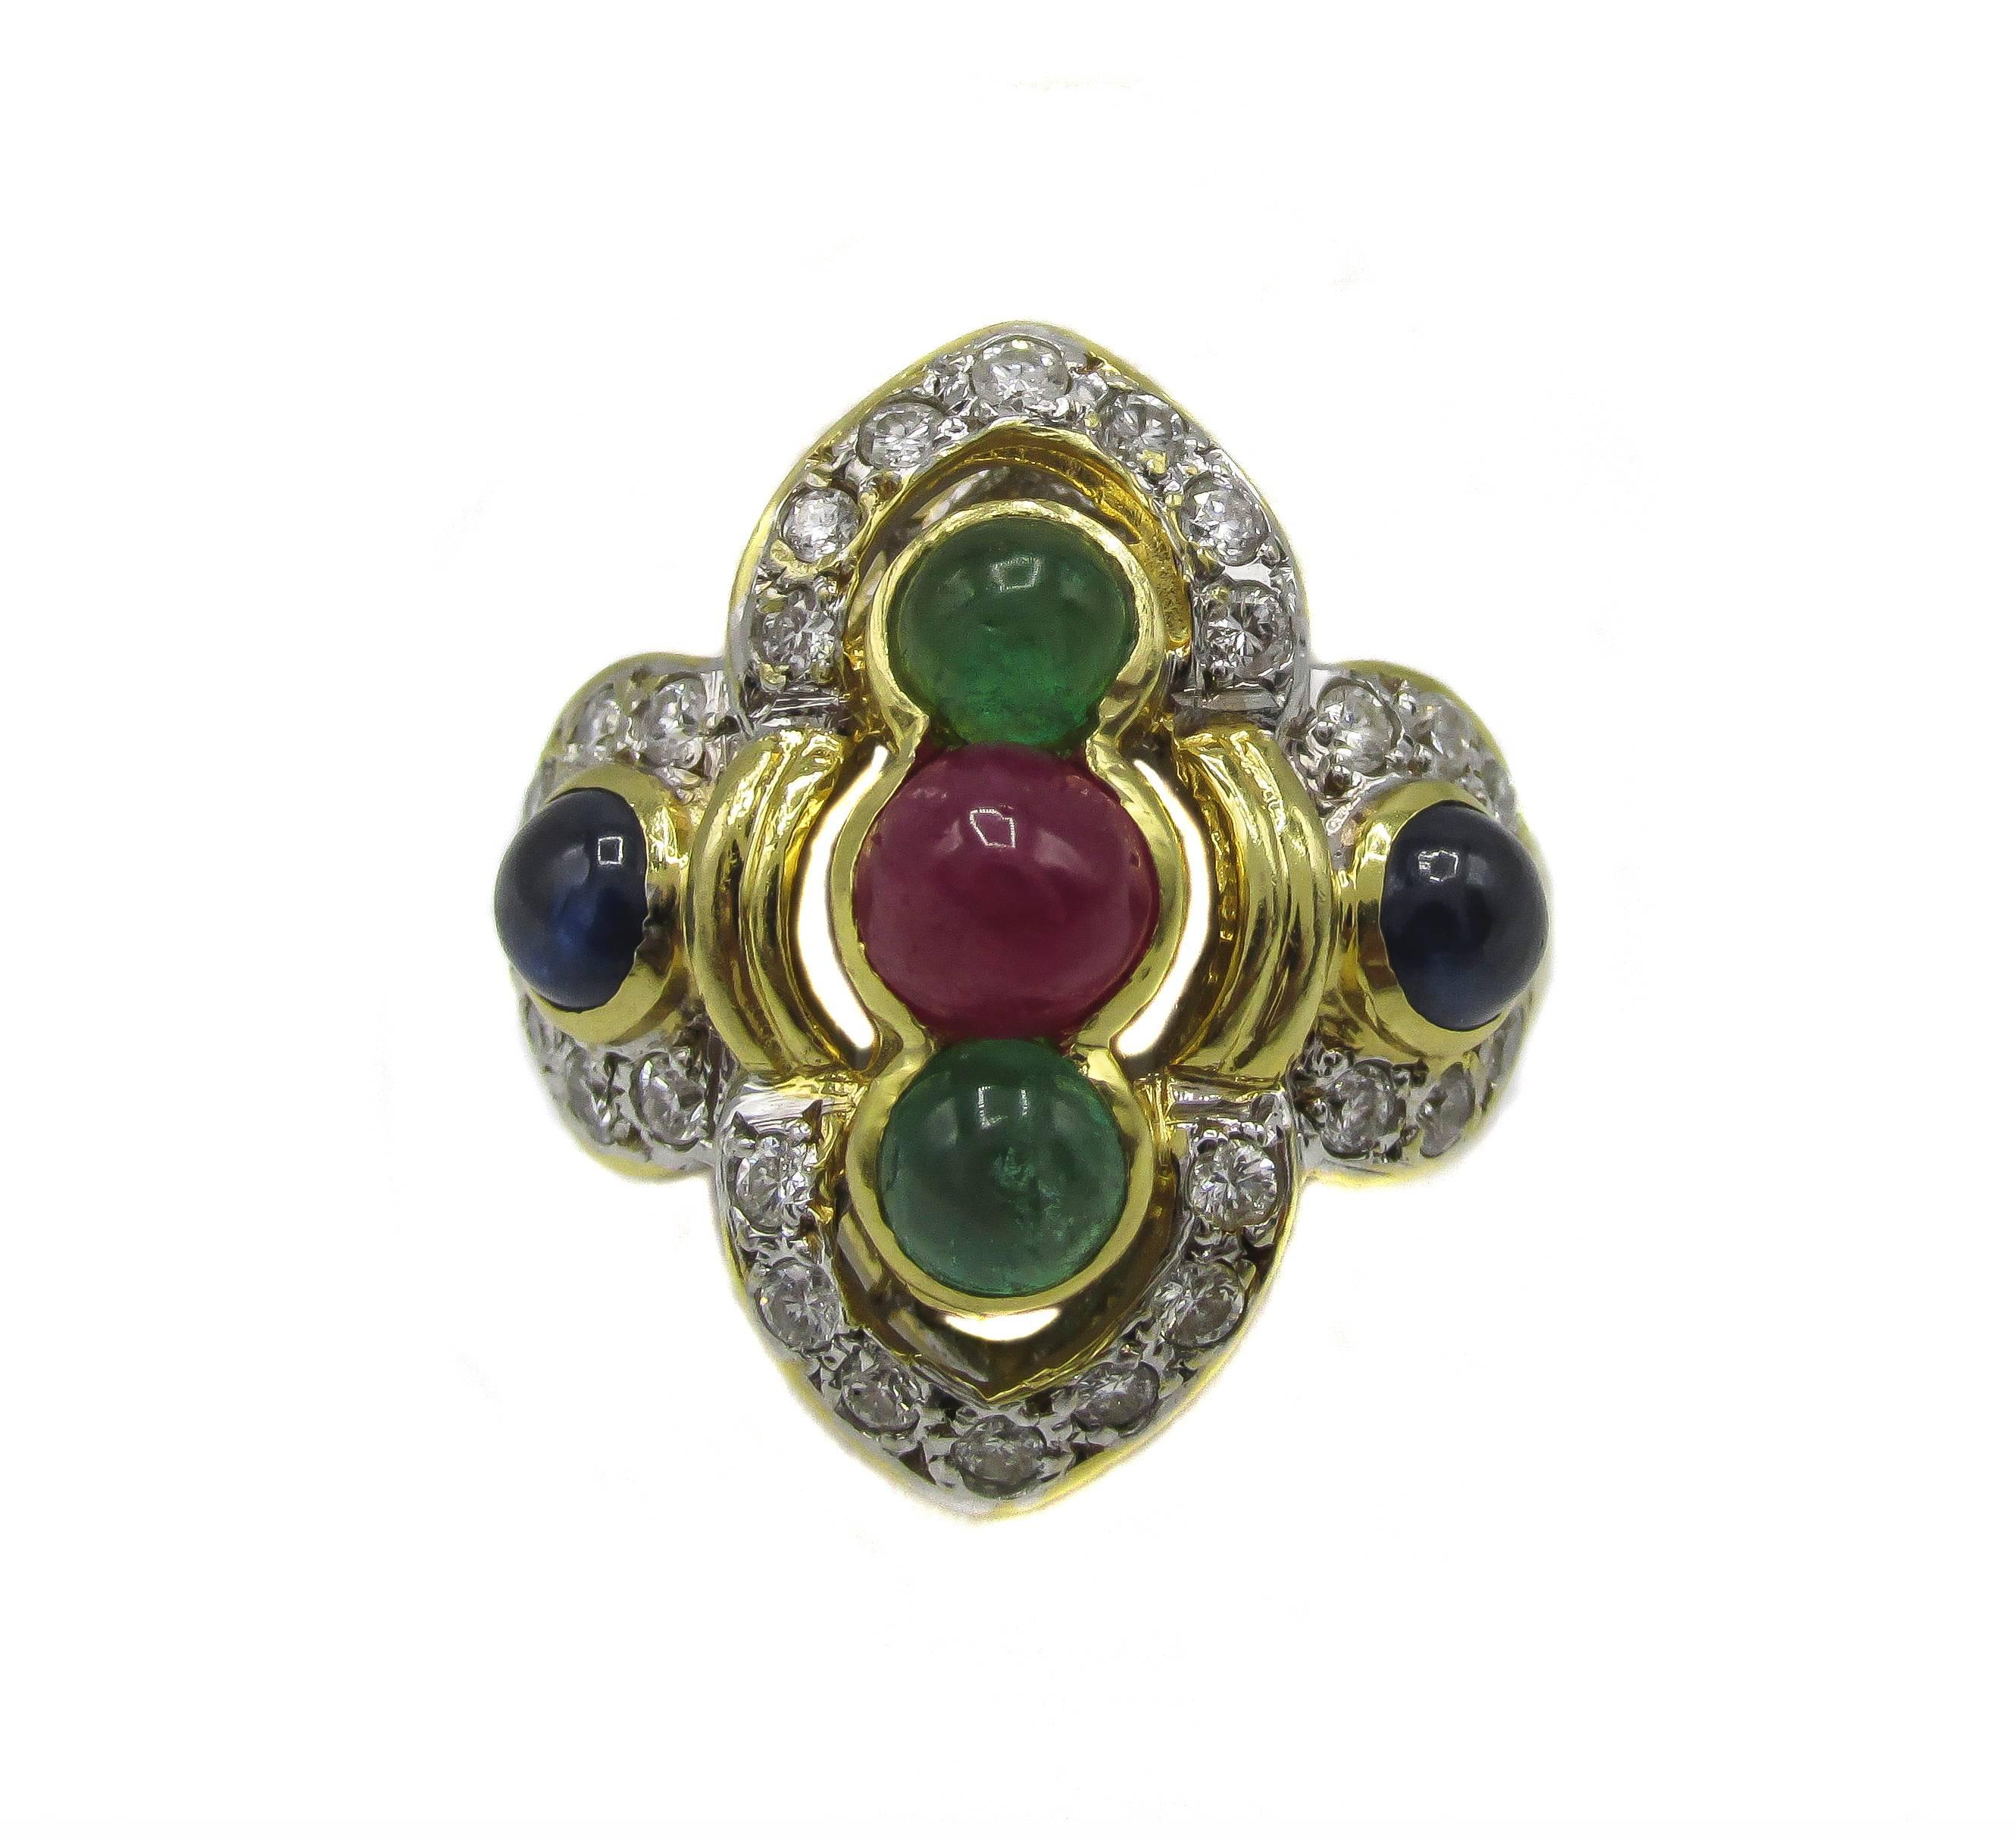 Chic 1980's 18 karat yellow gold ring with a center navette shaped design set with 7 round brilliant cut diamonds on either side and 2 cabochon emeralds and 1 cabochon ruby bezel set in the center. On either side of the shank, 1 bezel set cabochon